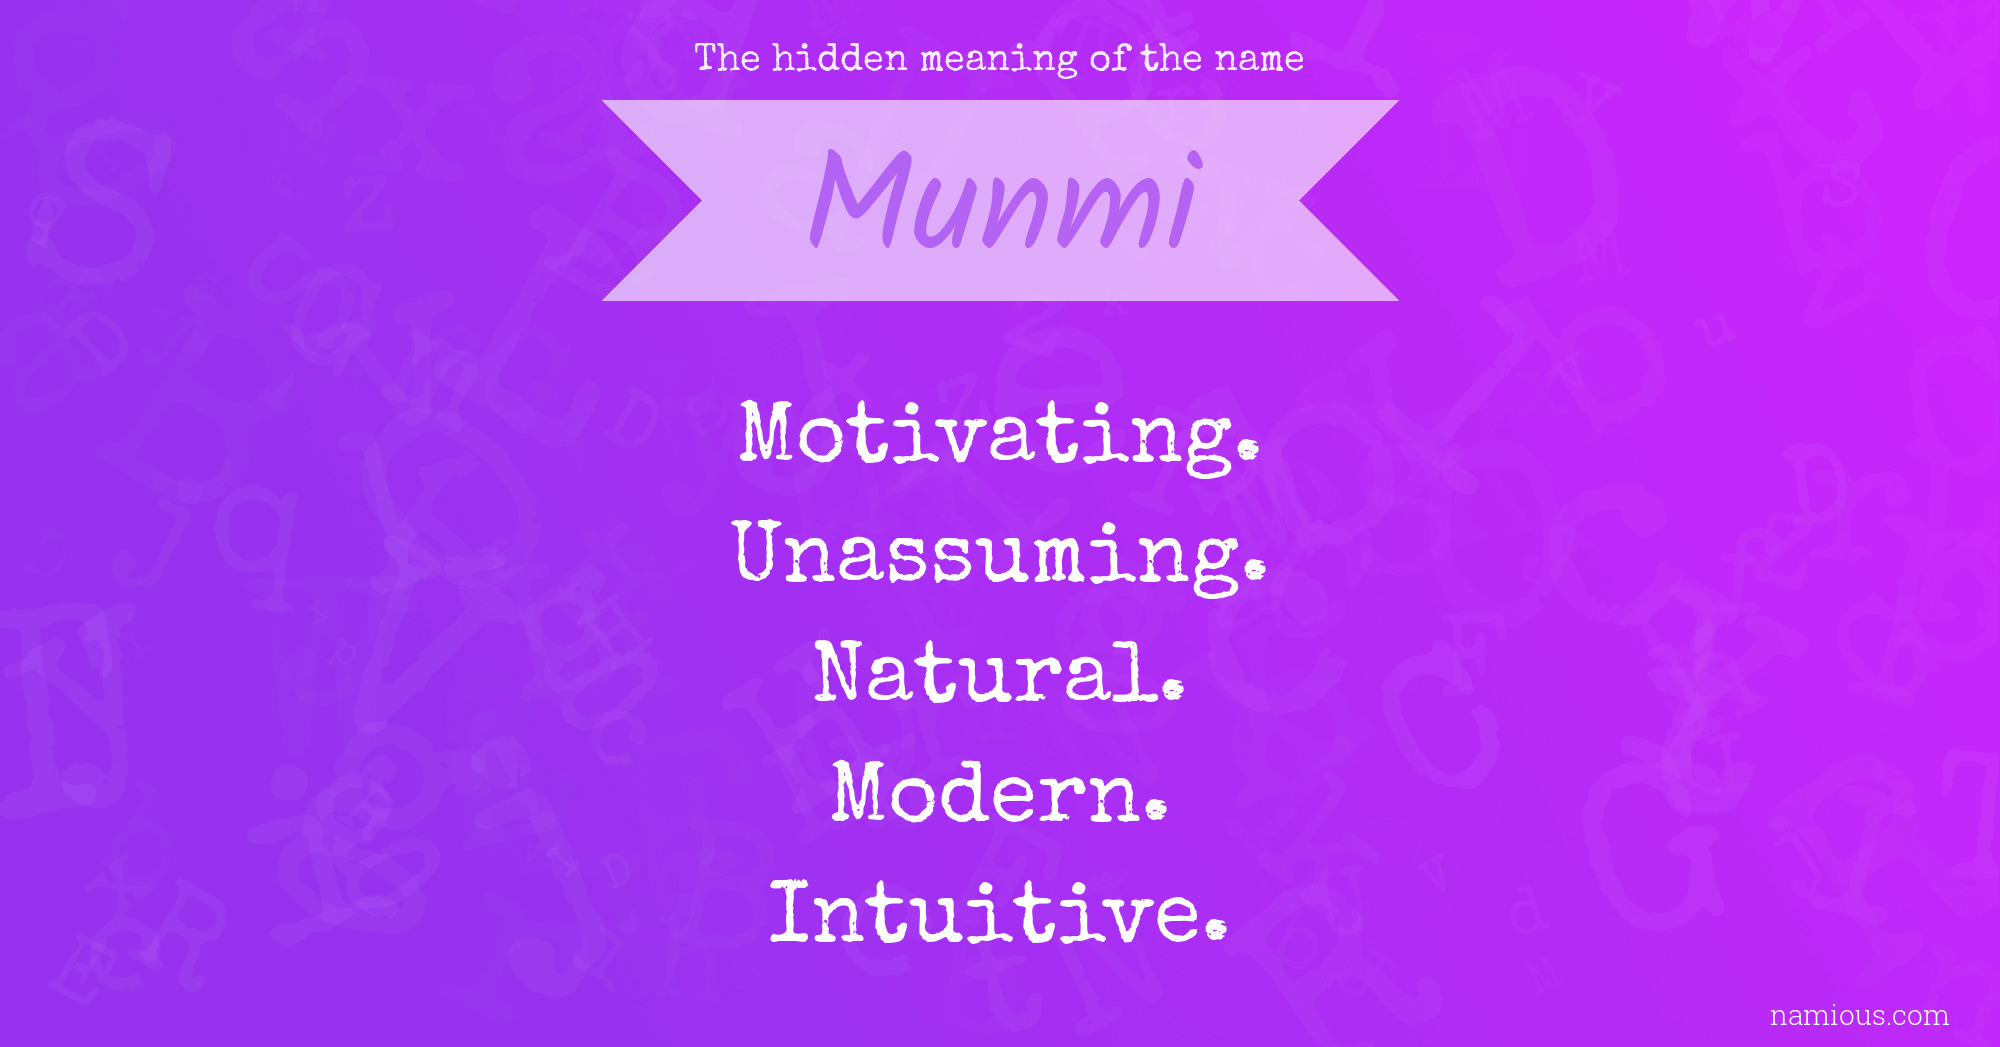 The hidden meaning of the name Munmi